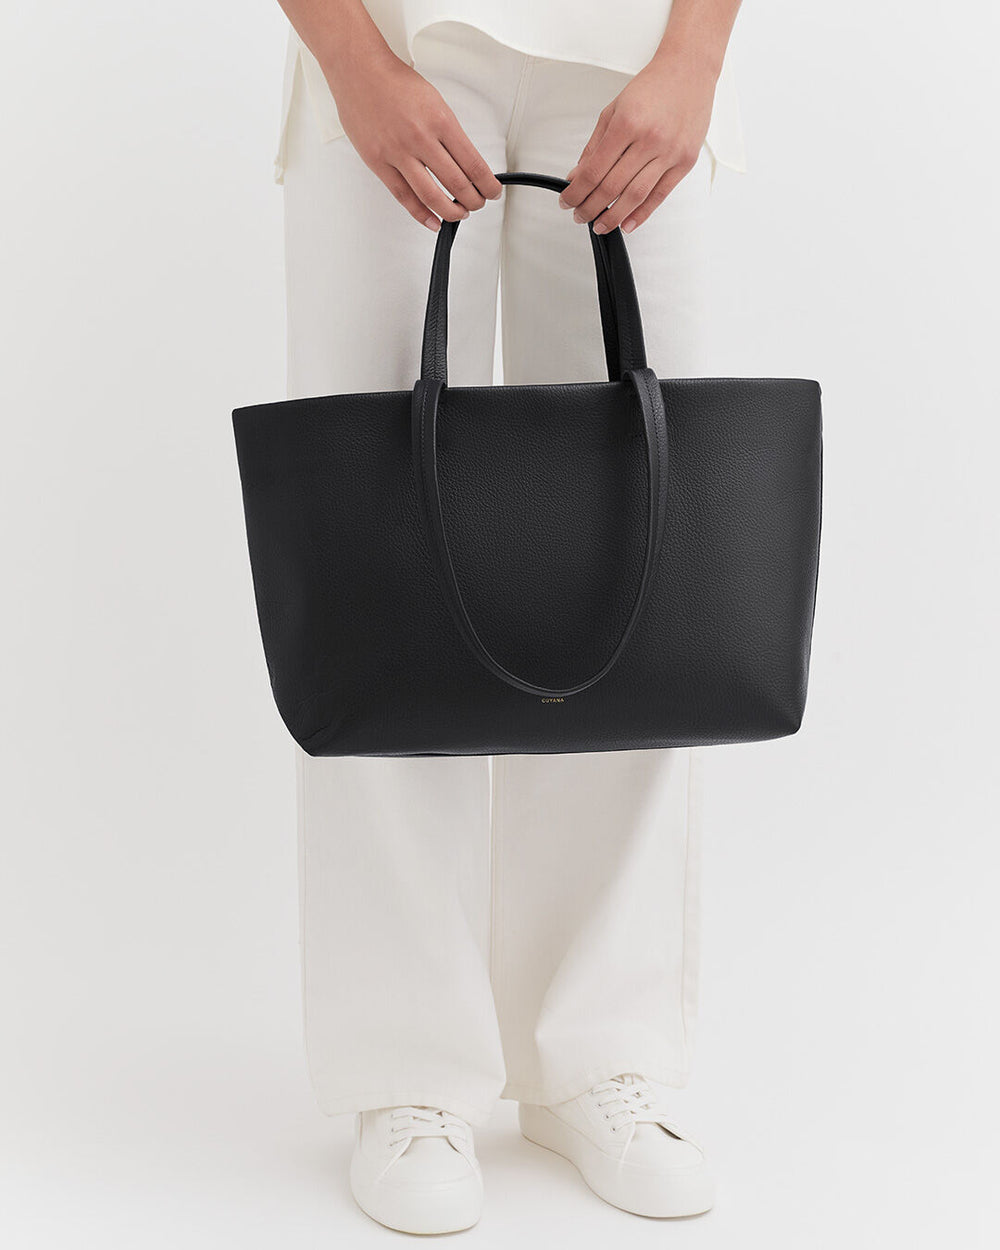 Person holding a large tote bag, standing in white pants and sneakers.